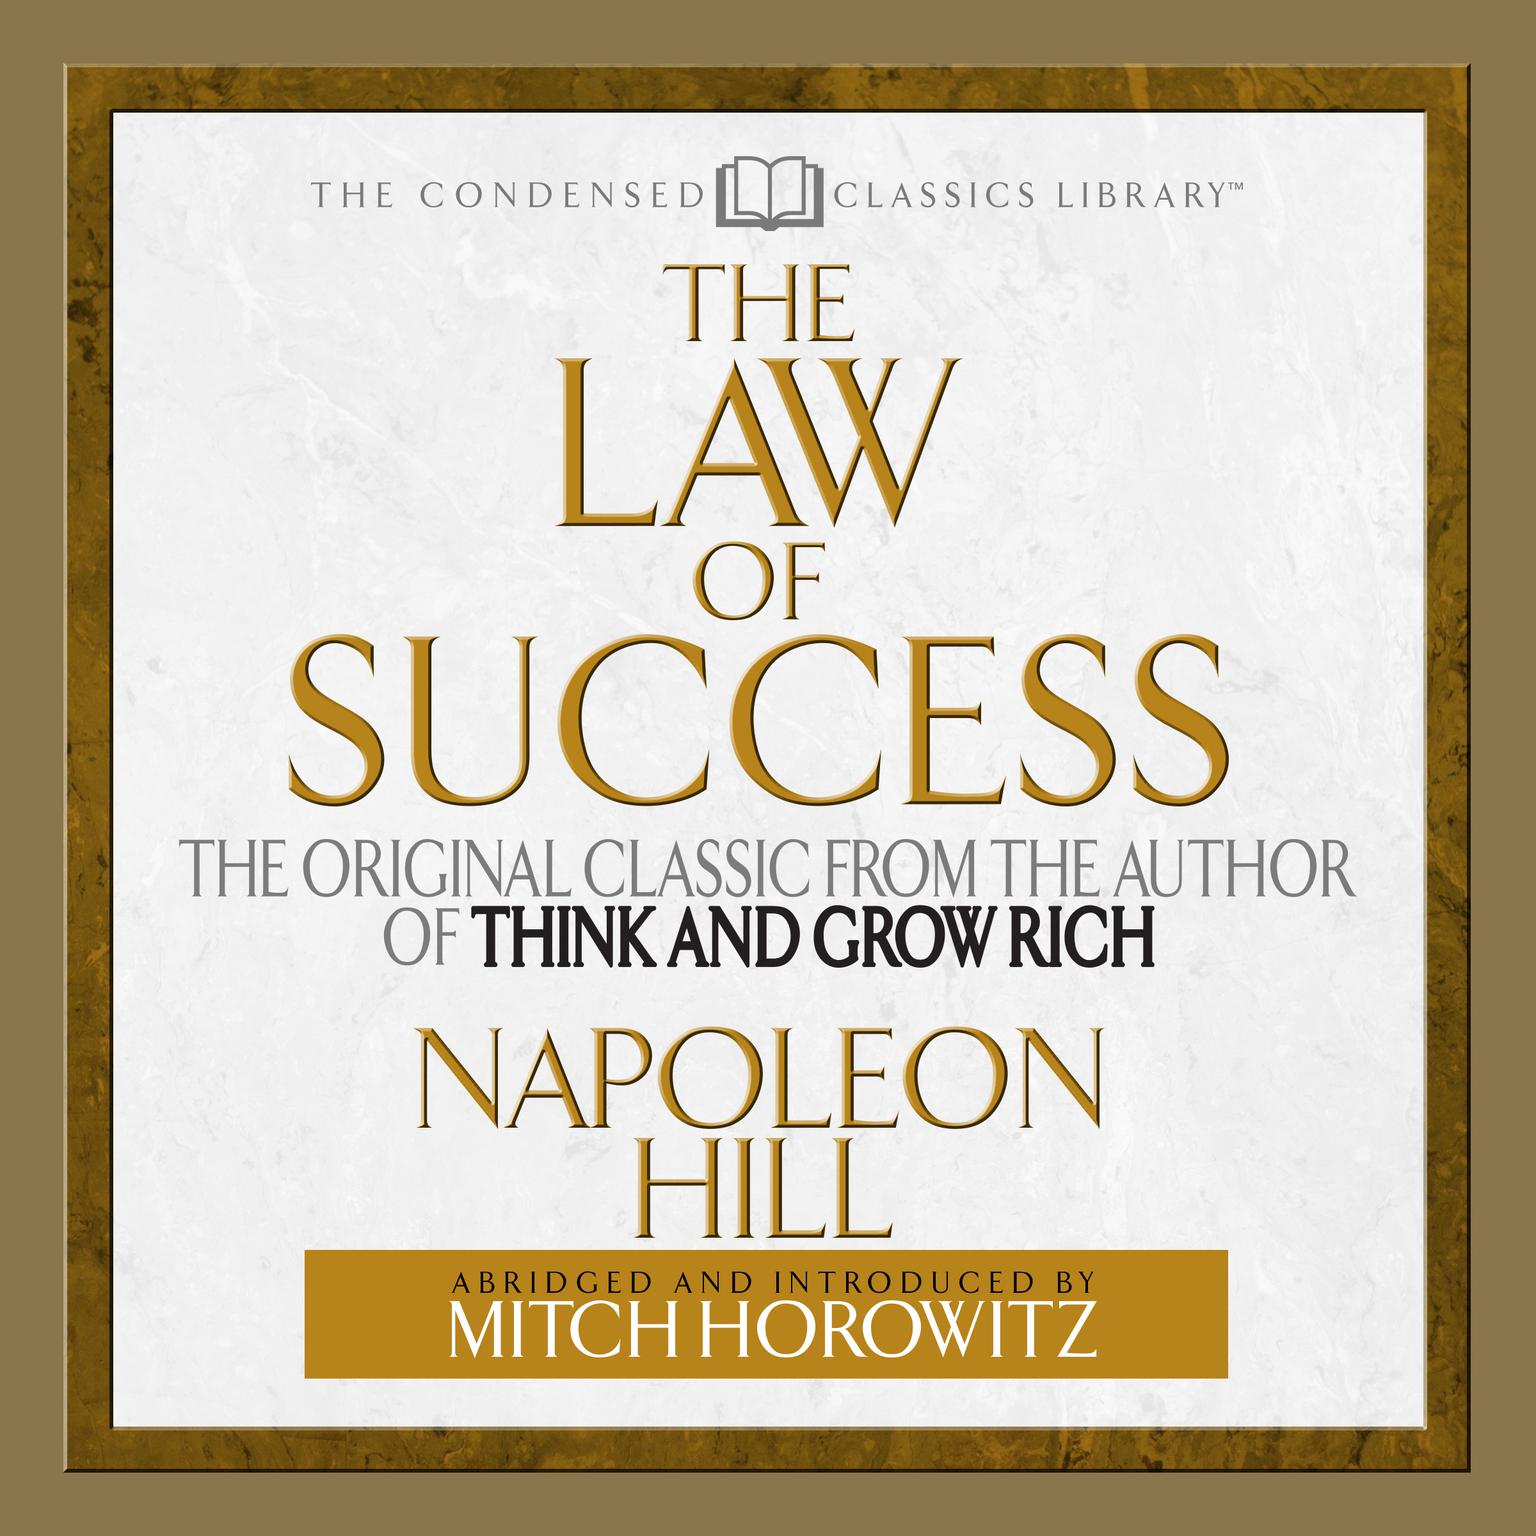 The Law of Success (Abridged): The Original Classic From the Author of THINK AND GROW RICH (Abridged) Audiobook, by Napoleon Hill